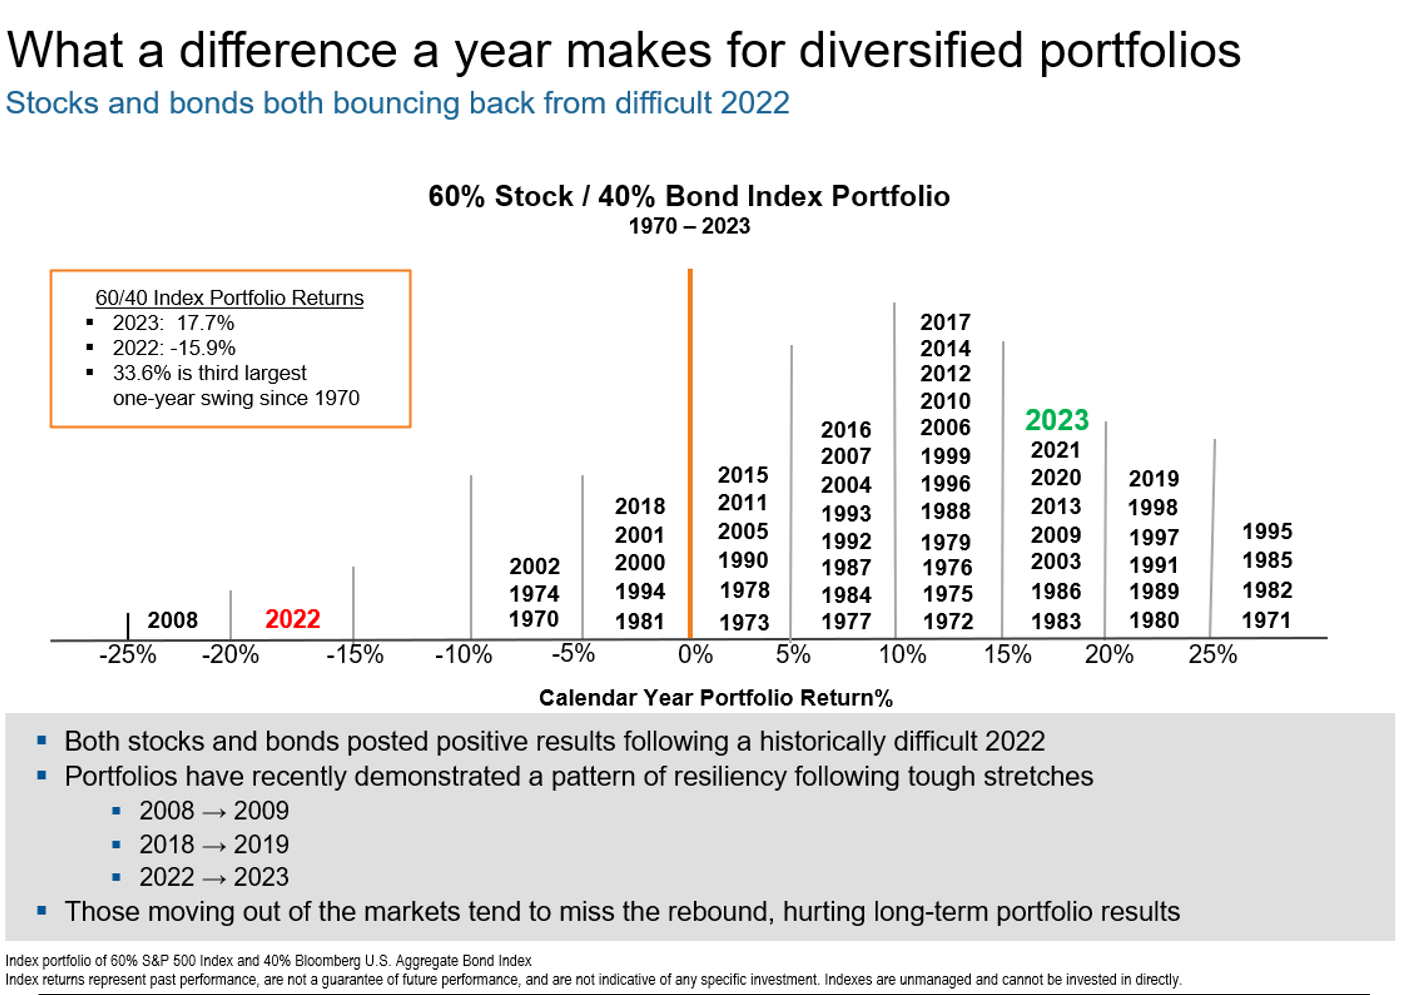 What a difference a year makes for diversified portfolios: Stocks and bonds bounce back from difficult 2022